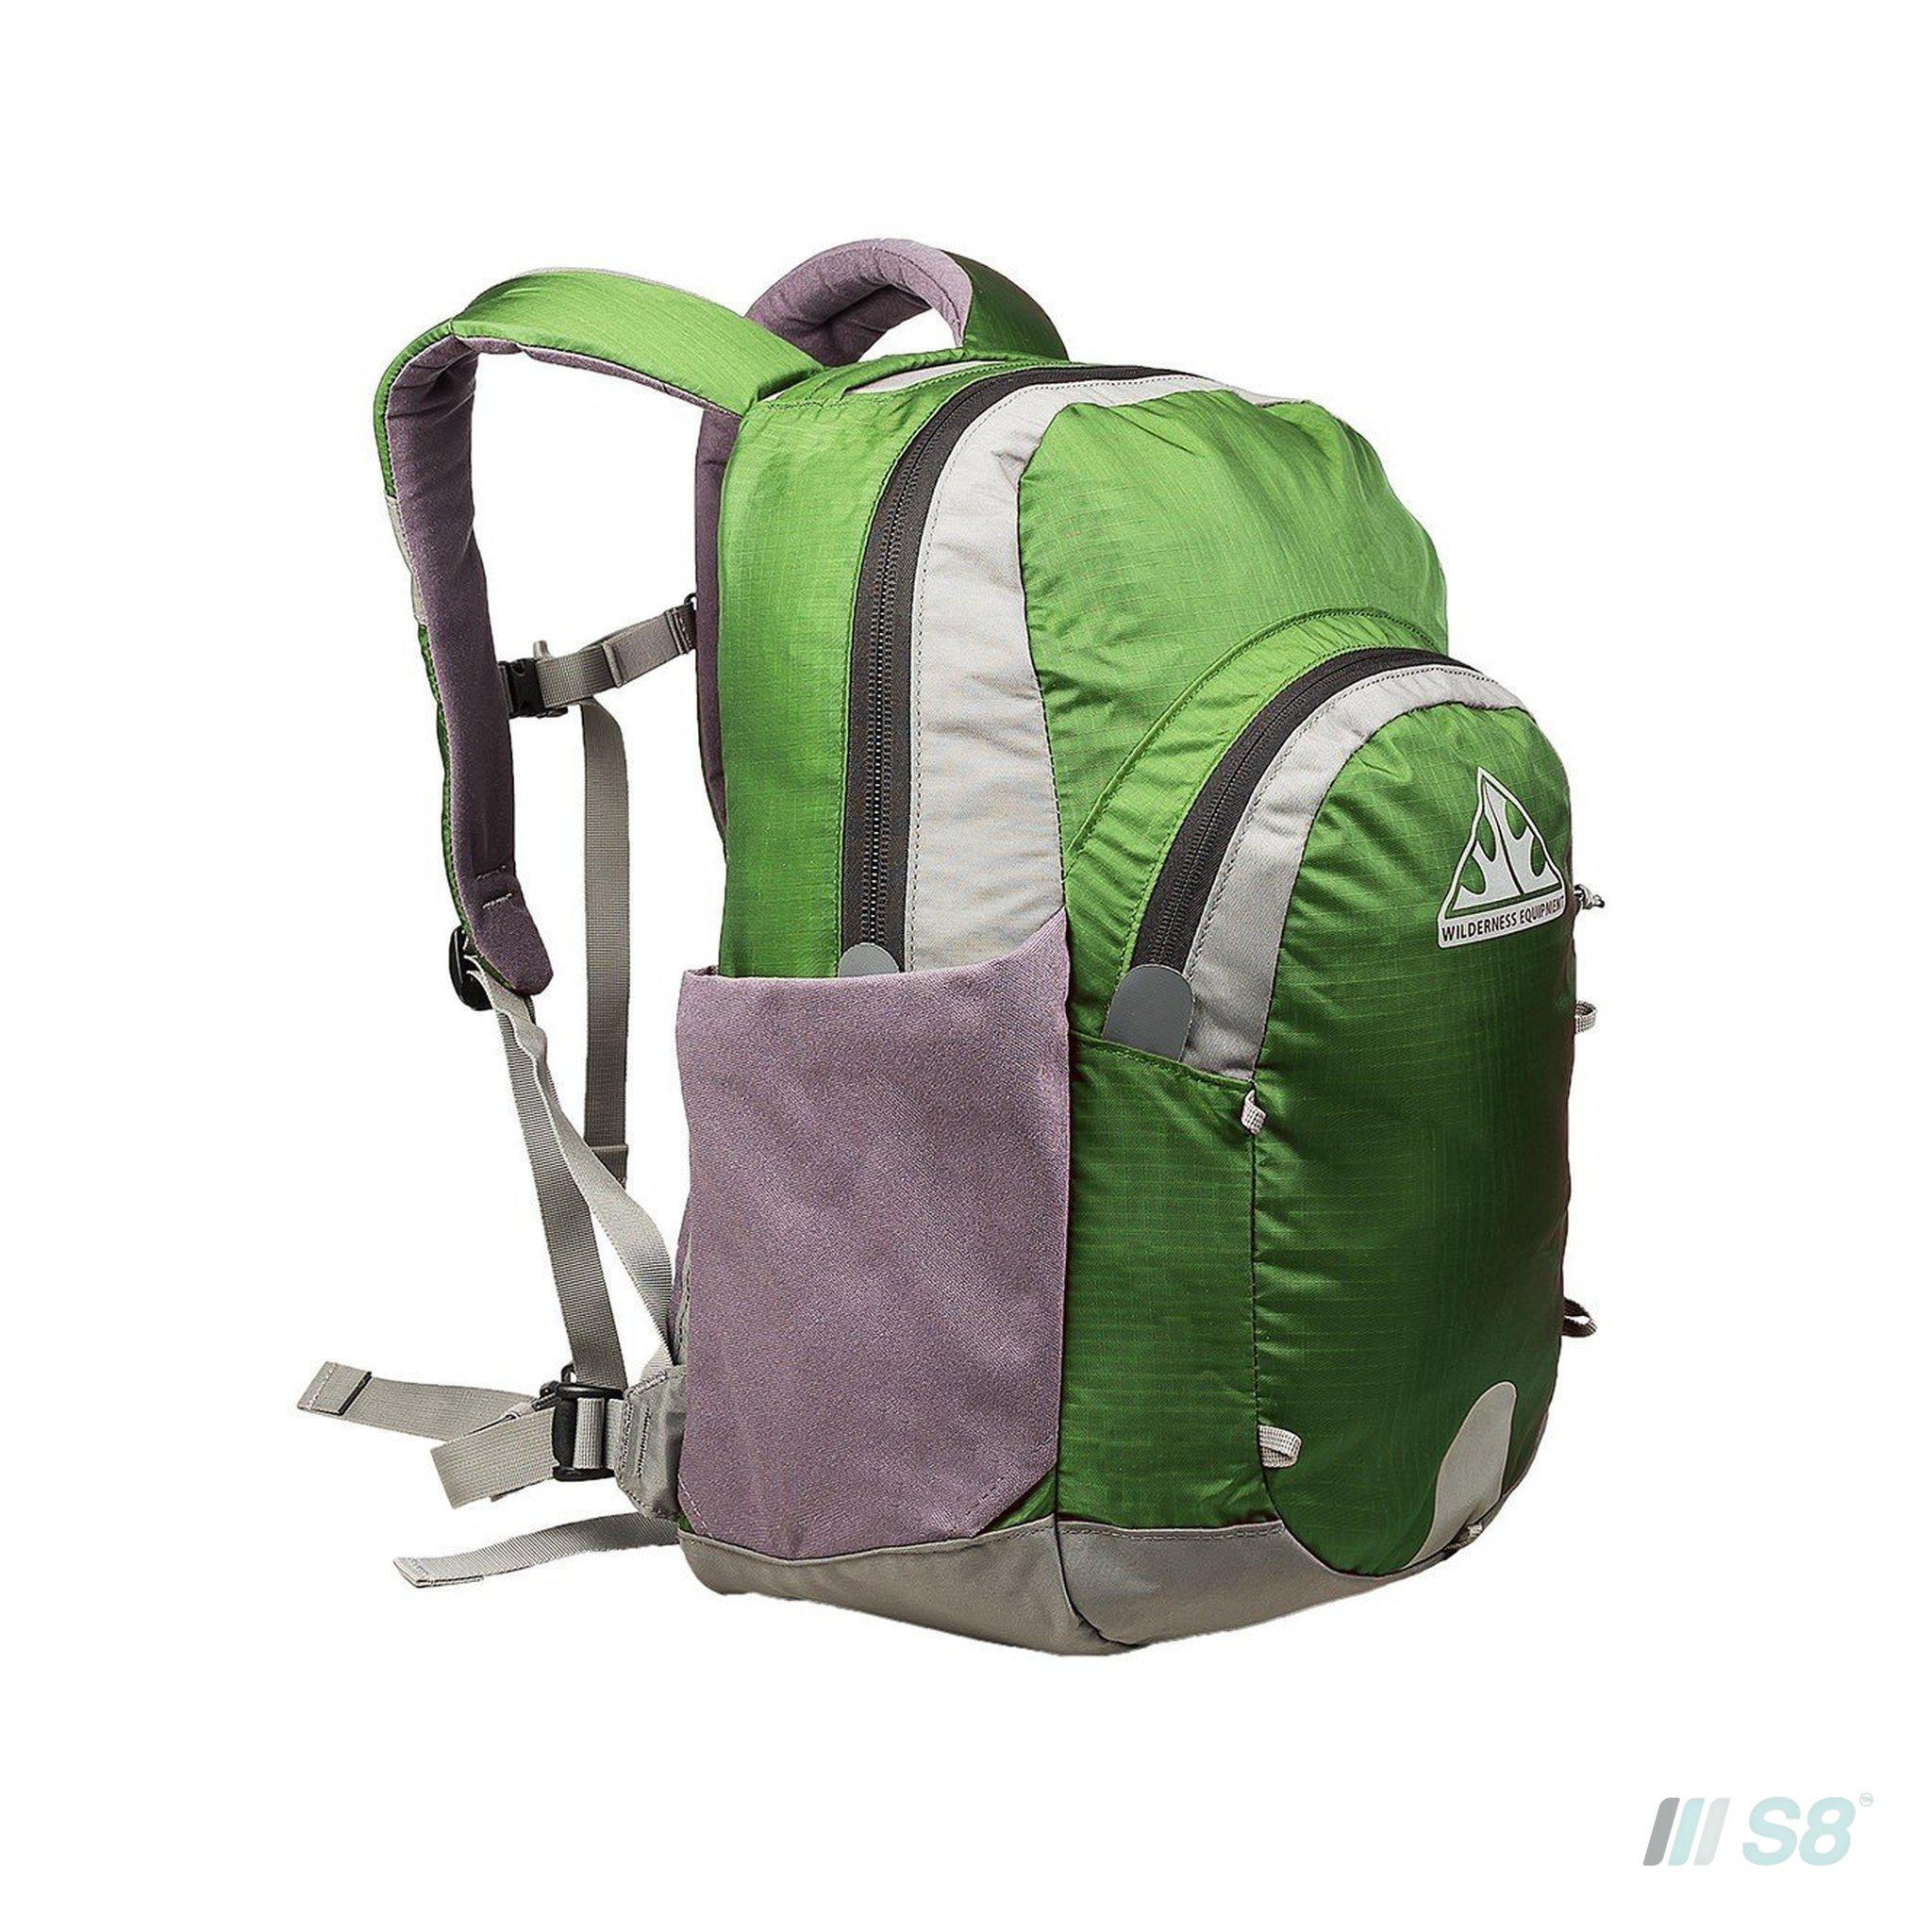 Wilderness Equipment Spark-Wilderness Equipment-S8 Products Group